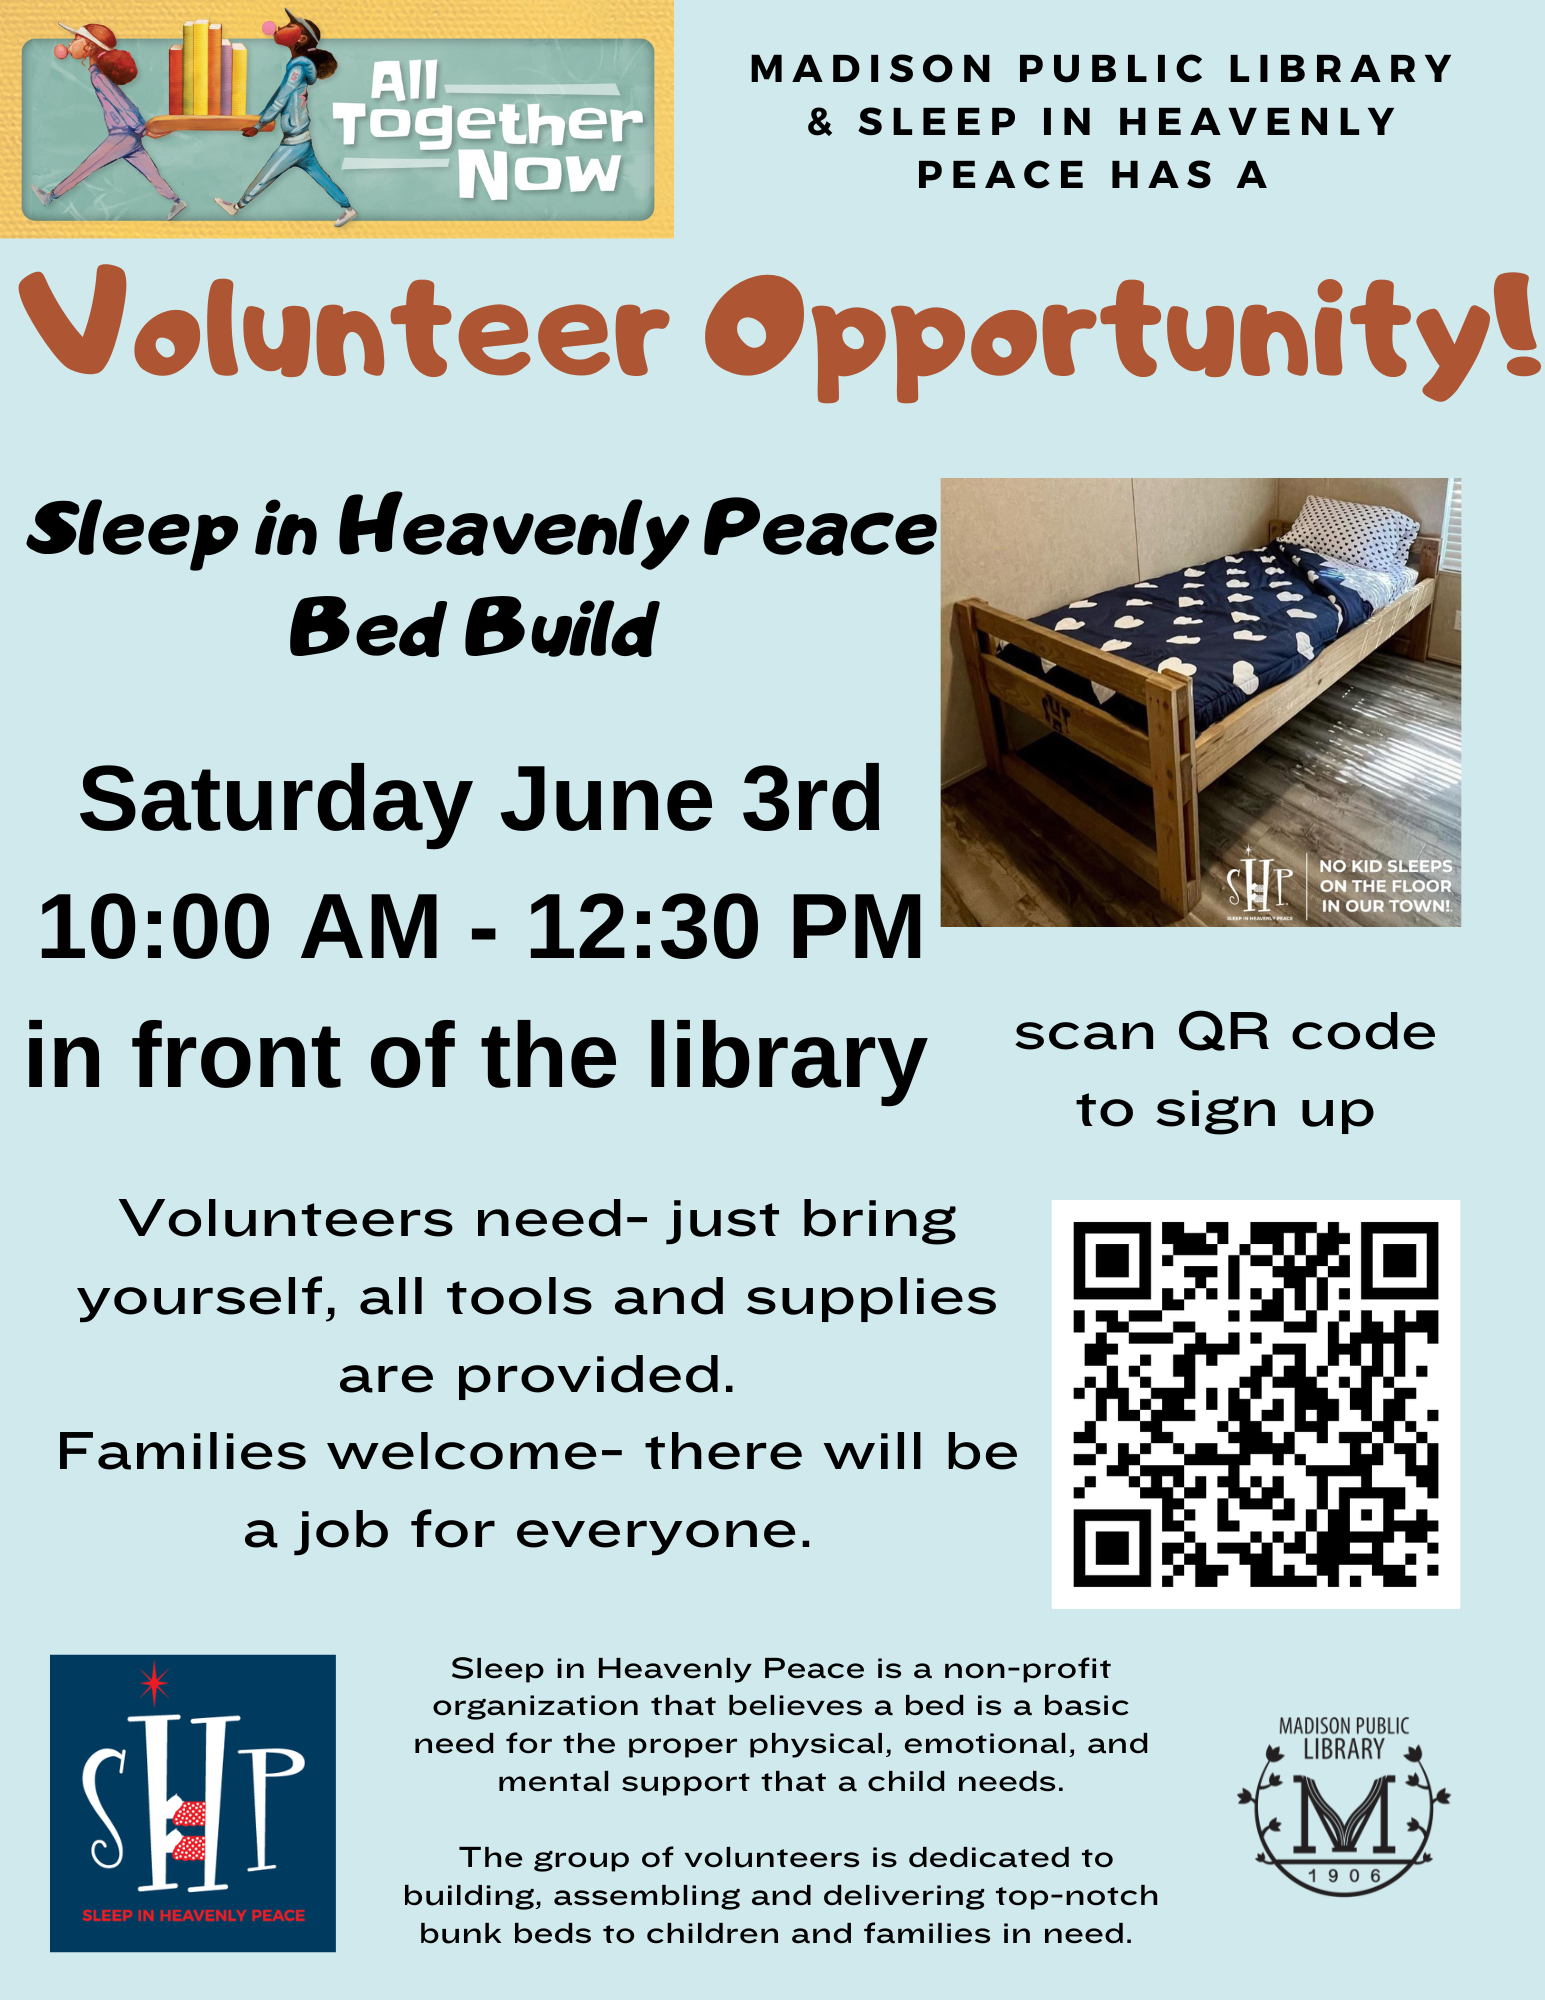 <h1 class="tribe-events-single-event-title">Sleep in Heavenly Peace Bed Build</h1>